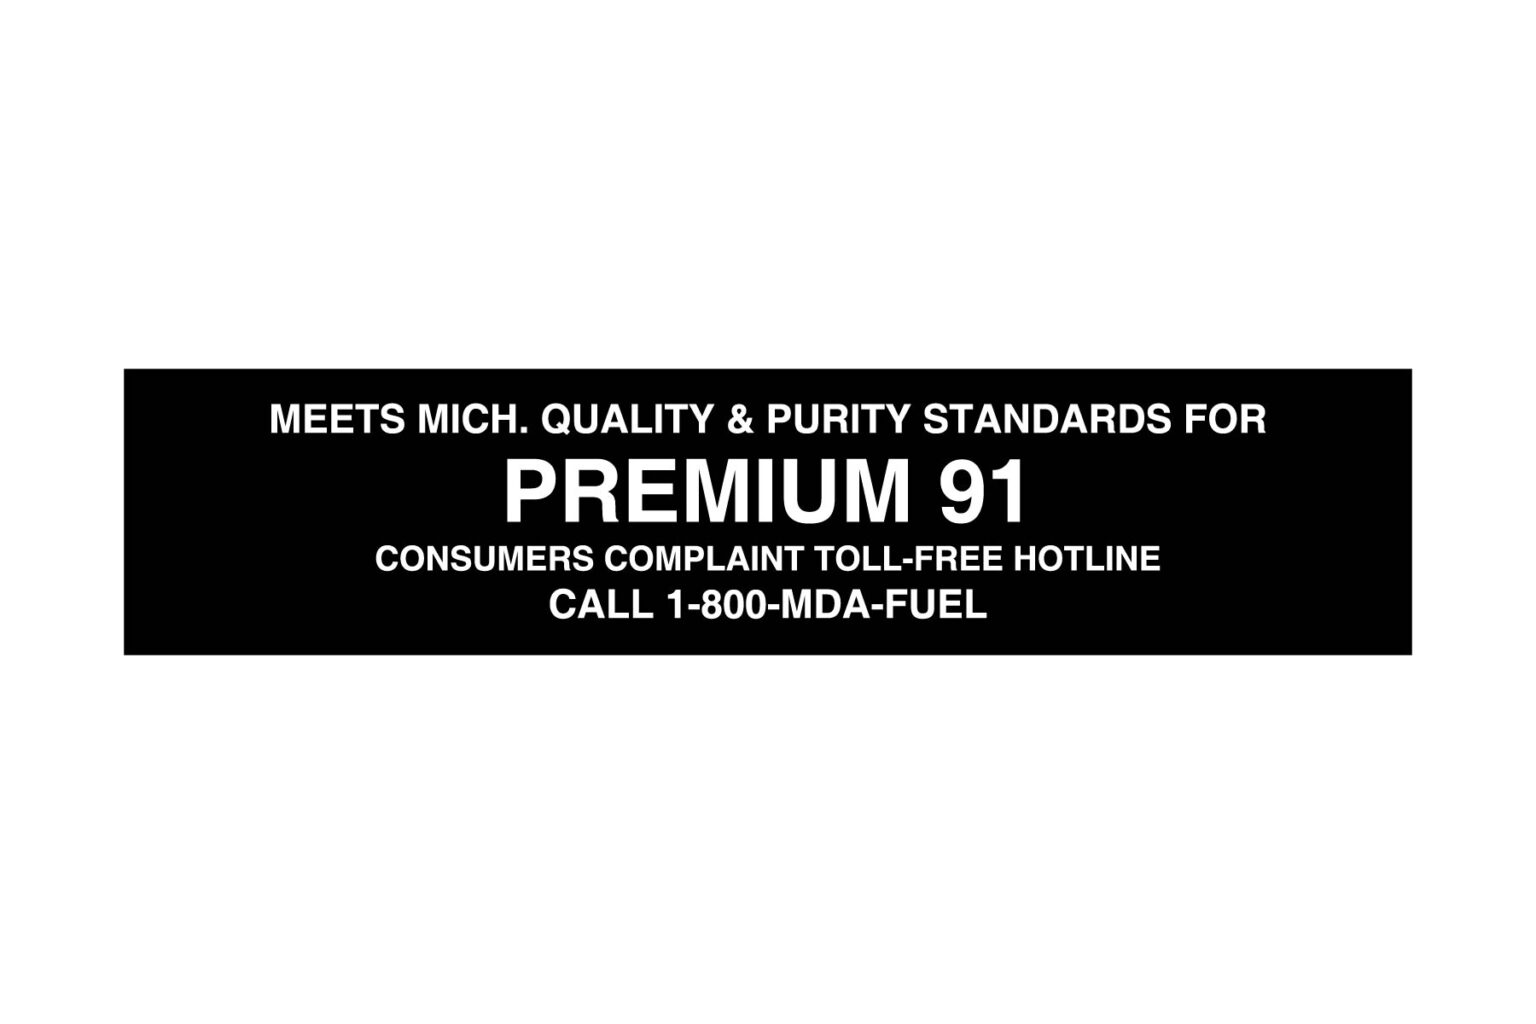 Meets Michigan Quality & Purity Standards for Premium 91 Decal